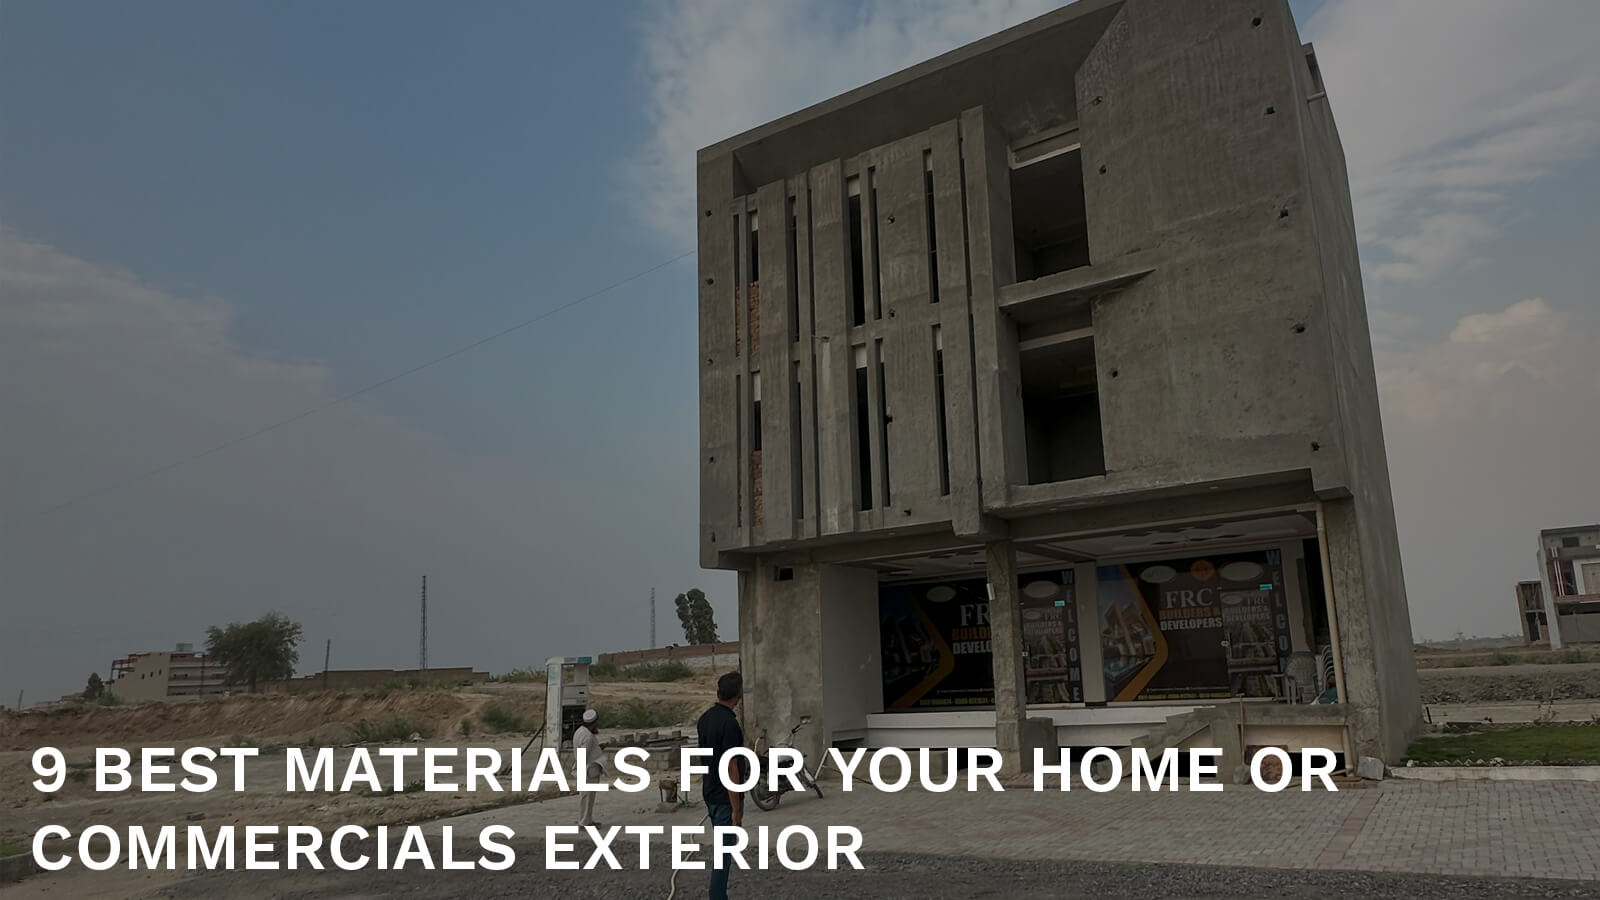 Best materials for home exterior or commercials exterior